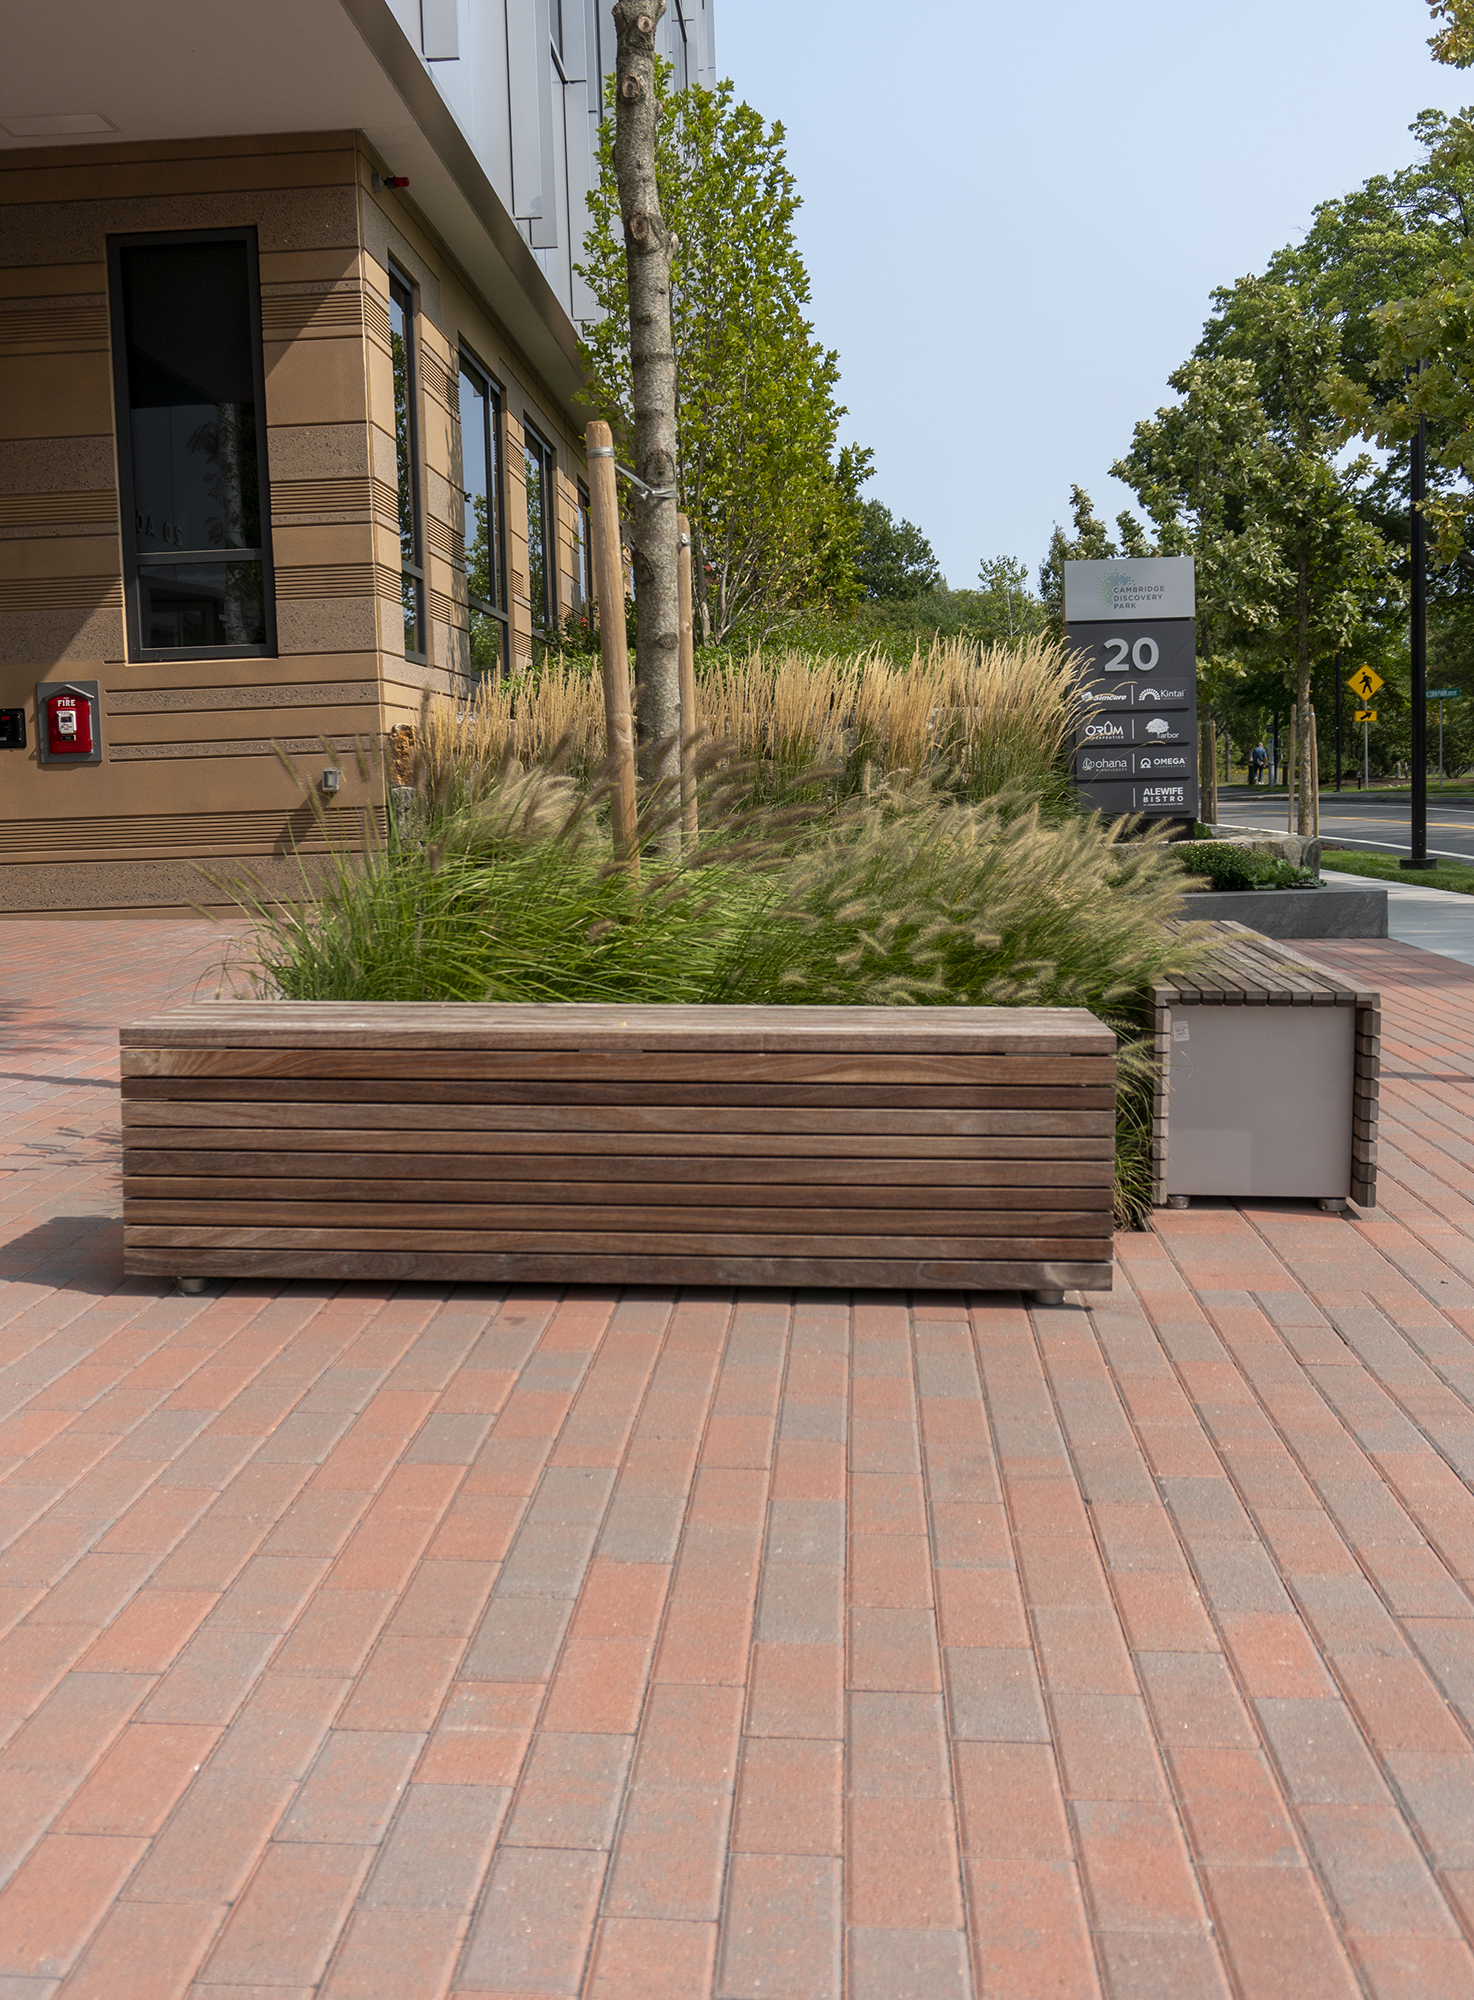 A large outdoor seated area with planted trees and a sidewalk features red Hollandstone brick pavers along the square.